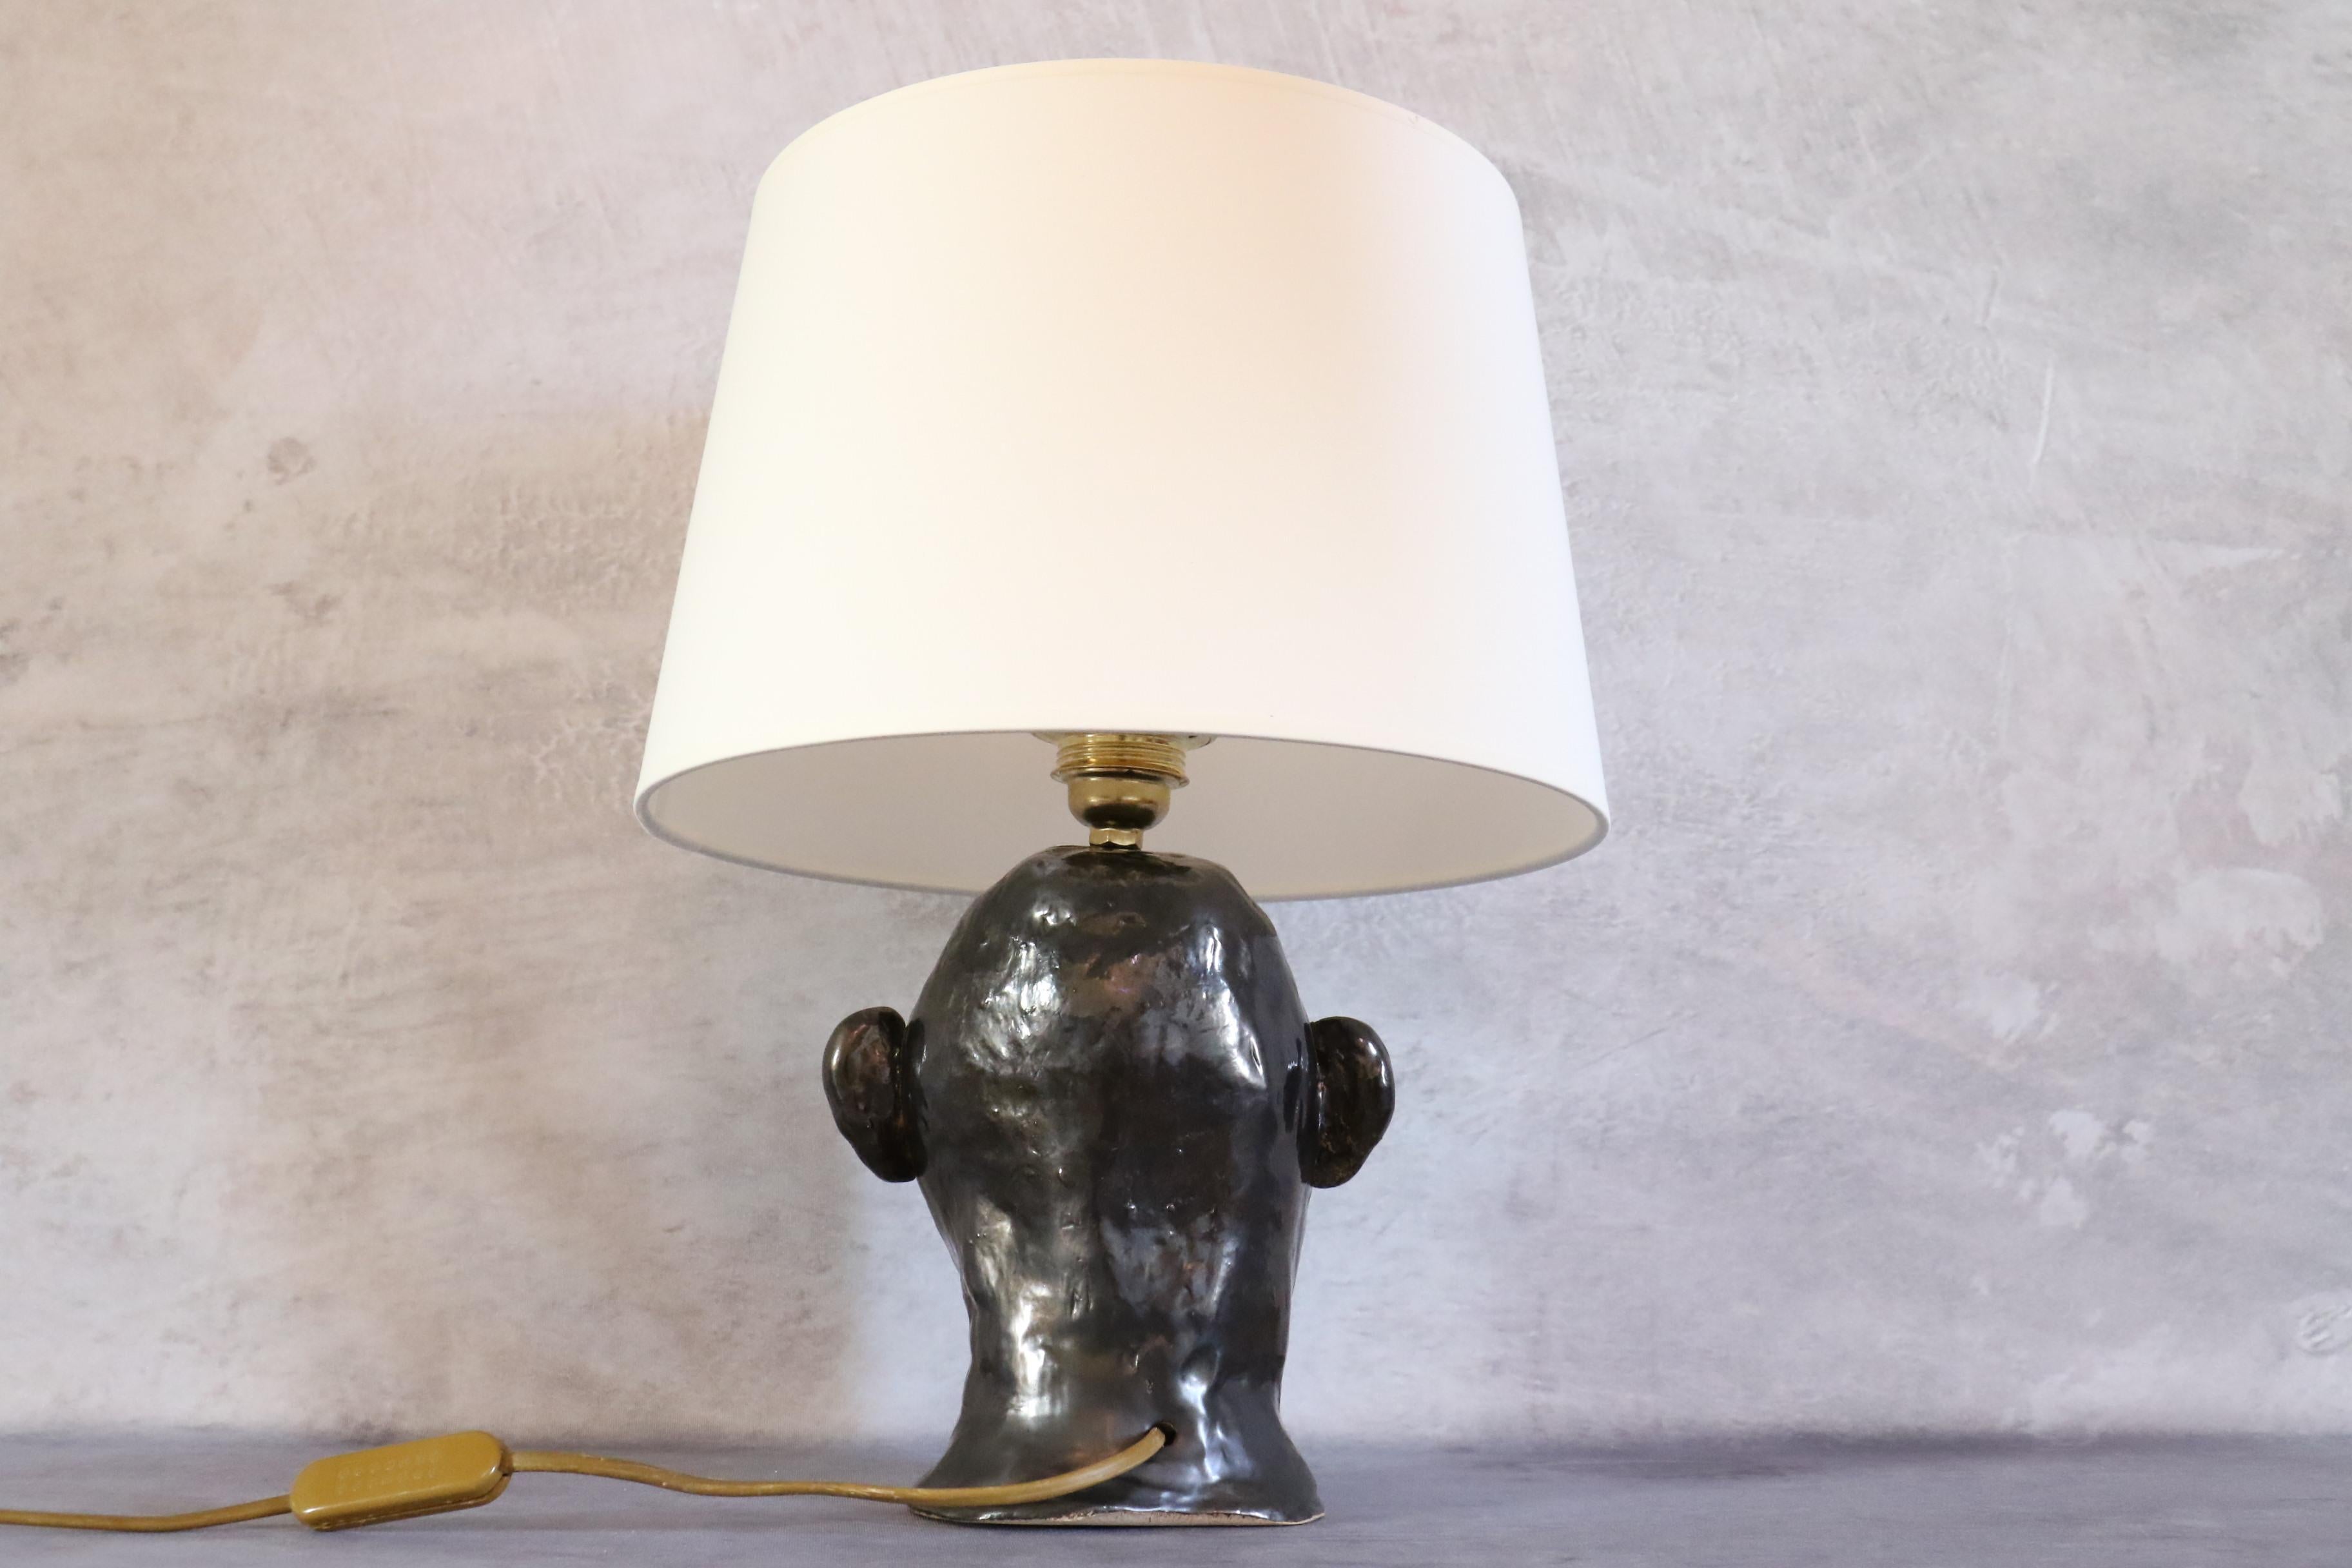 Enameled 1950s French ceramic lamp with face decoration in the style of Georges Jouve